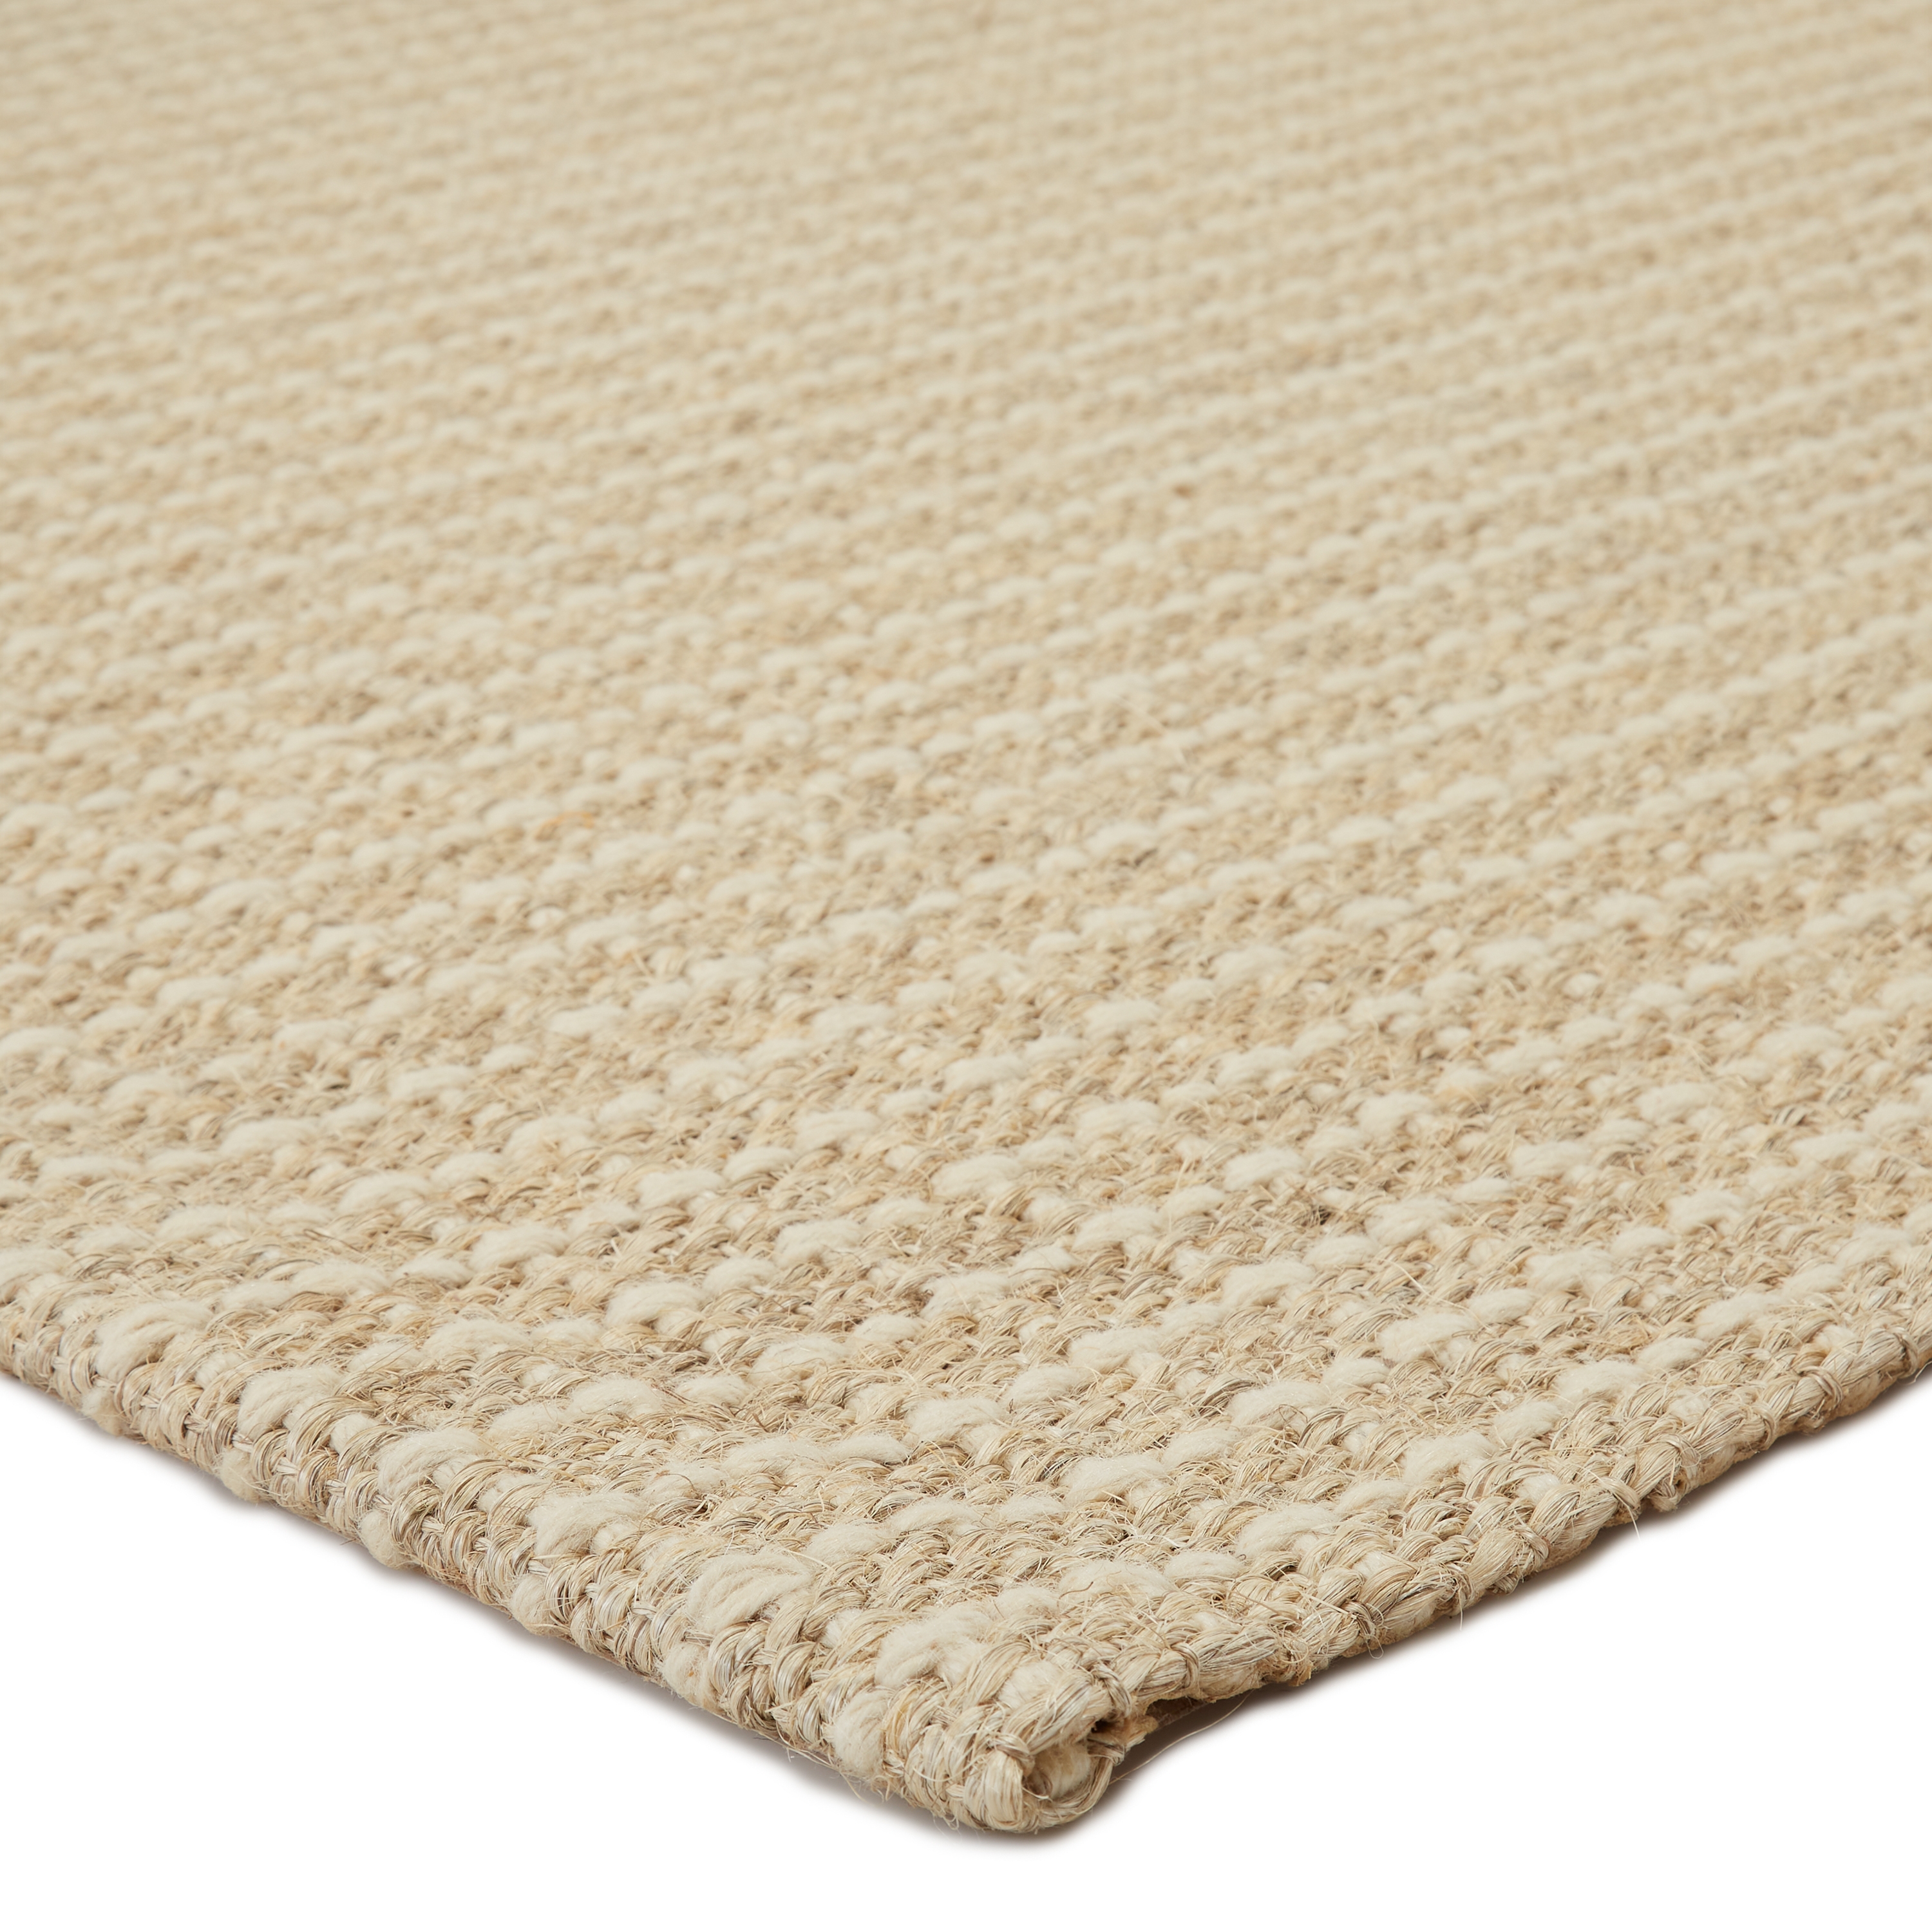 Tane Natural Solid Beige/ Ivory Area Rug (10'X14') - Image 1